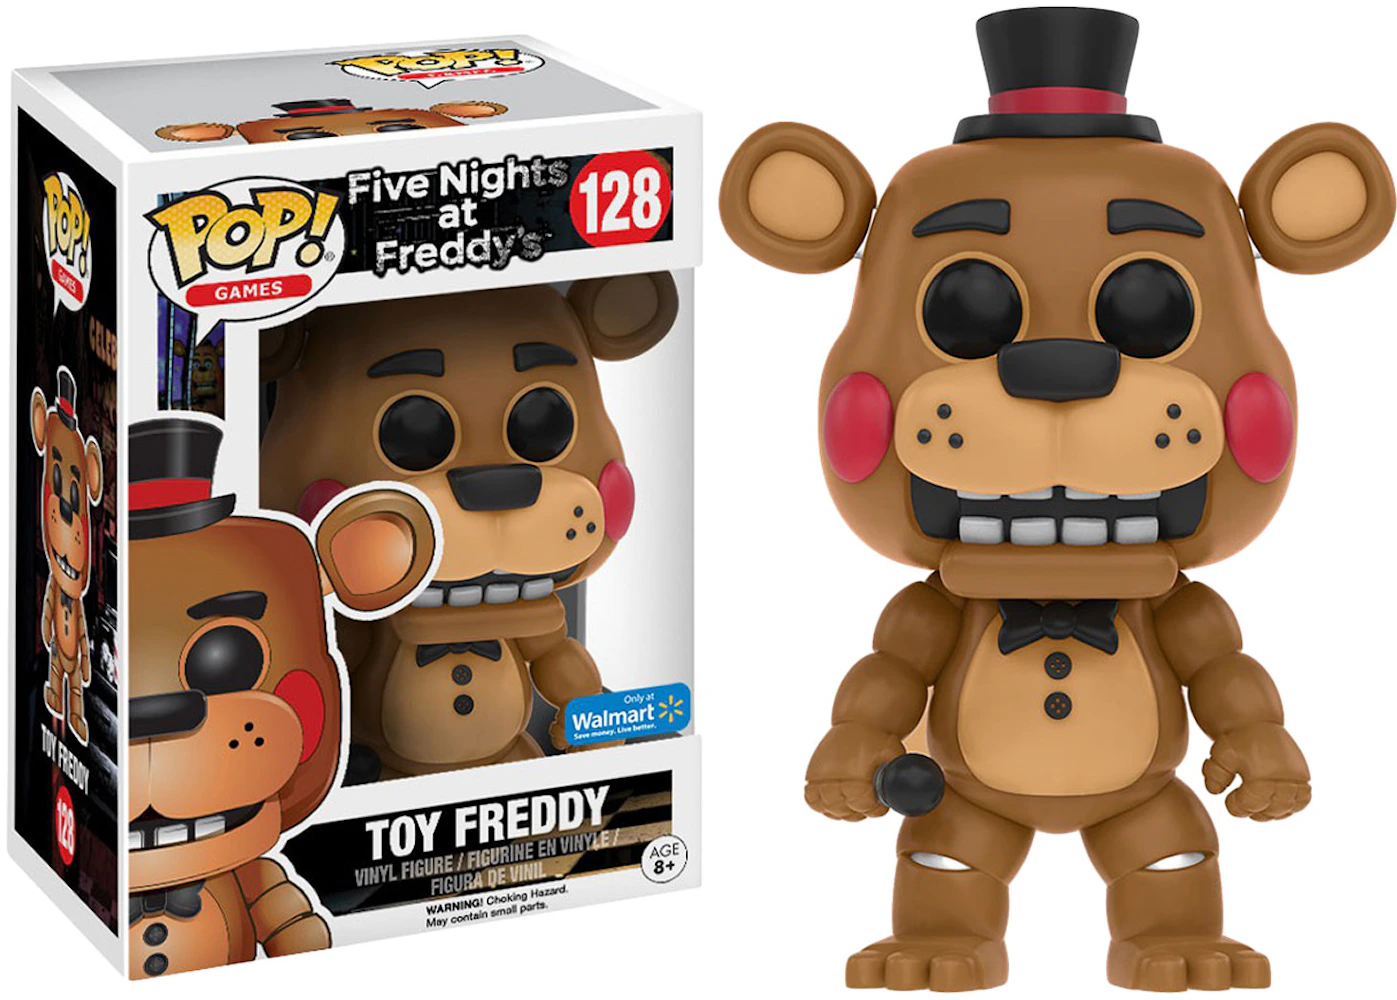 https://images.stockx.com/images/Funko-Pop-Games-Five-Nights-at-Freddys-Toy-Freddy-Walmart-Exclusive-Figure-128.jpg?fit=fill&bg=FFFFFF&w=700&h=500&fm=webp&auto=compress&q=90&dpr=2&trim=color&updated_at=1651266659